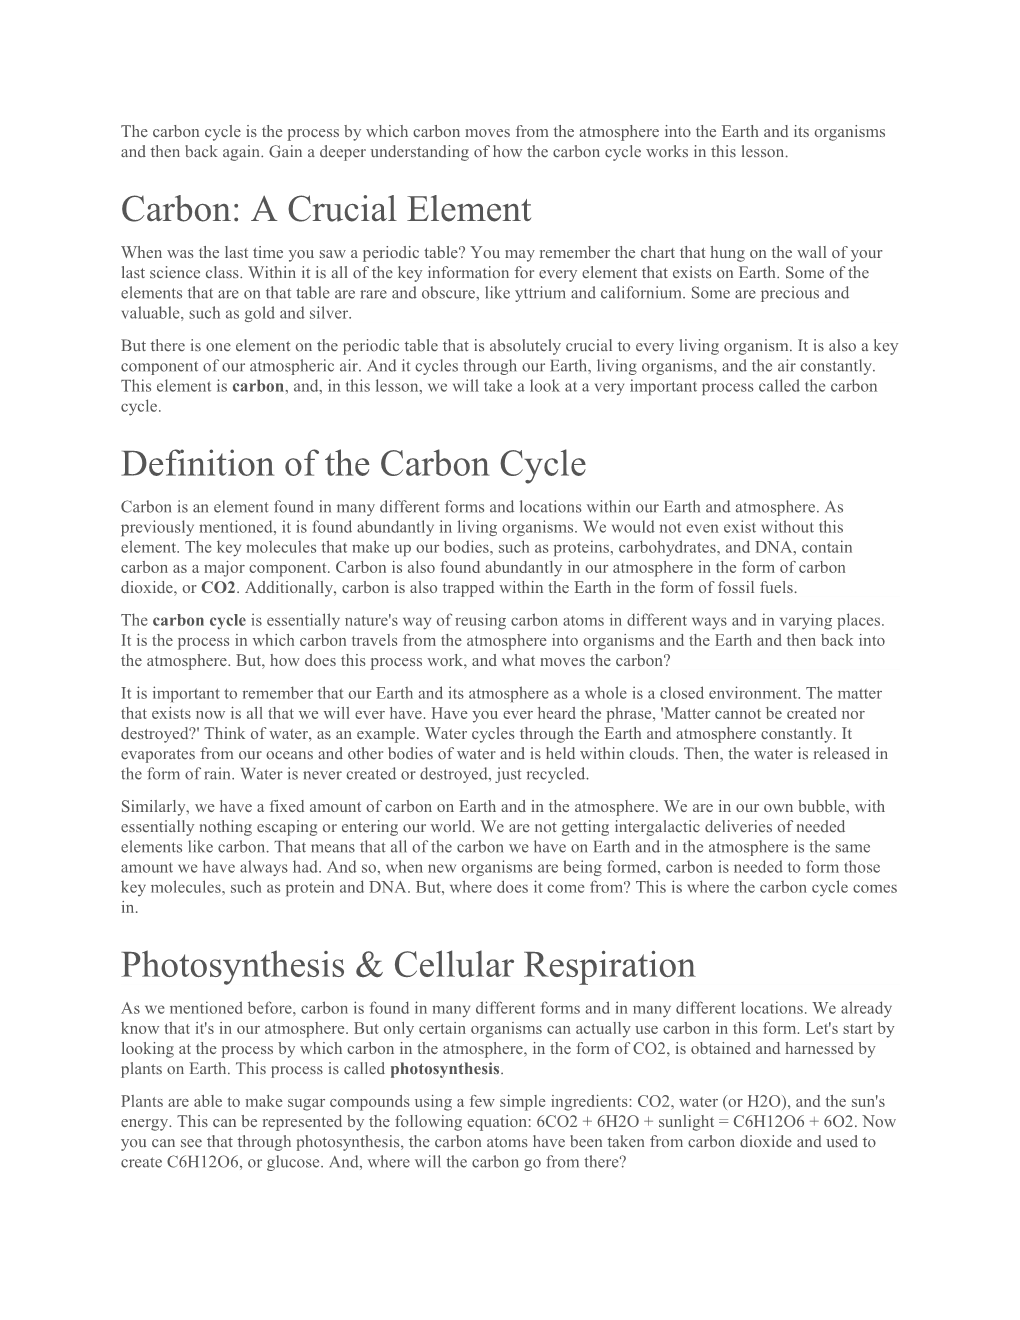 The Carbon Cycle Is the Process by Which Carbon Moves from the Atmosphere Into the Earth